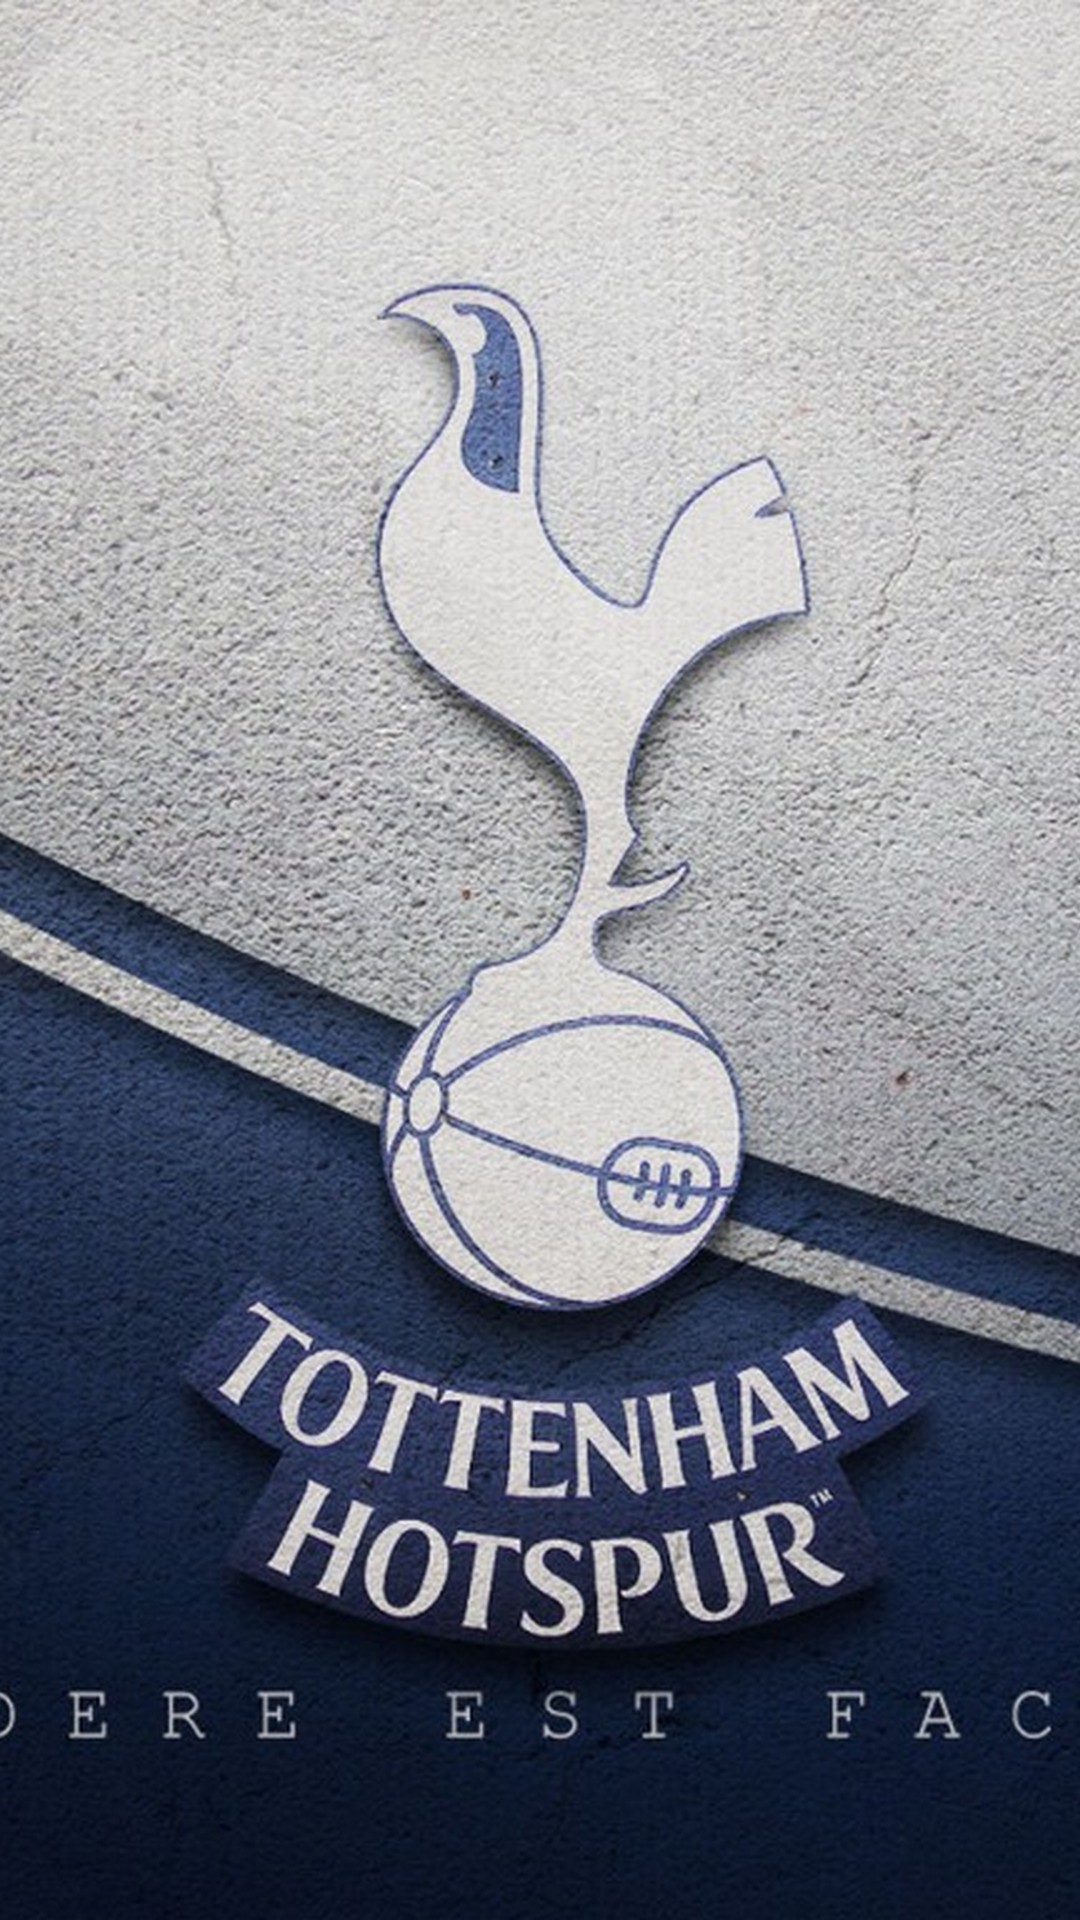 Tottenham Hotspur iPhone Wallpapers With high-resolution 1080X1920 pixel. You can use this wallpaper for your Desktop Computers, Mac Screensavers, Windows Backgrounds, iPhone Wallpapers, Tablet or Android Lock screen and another Mobile device